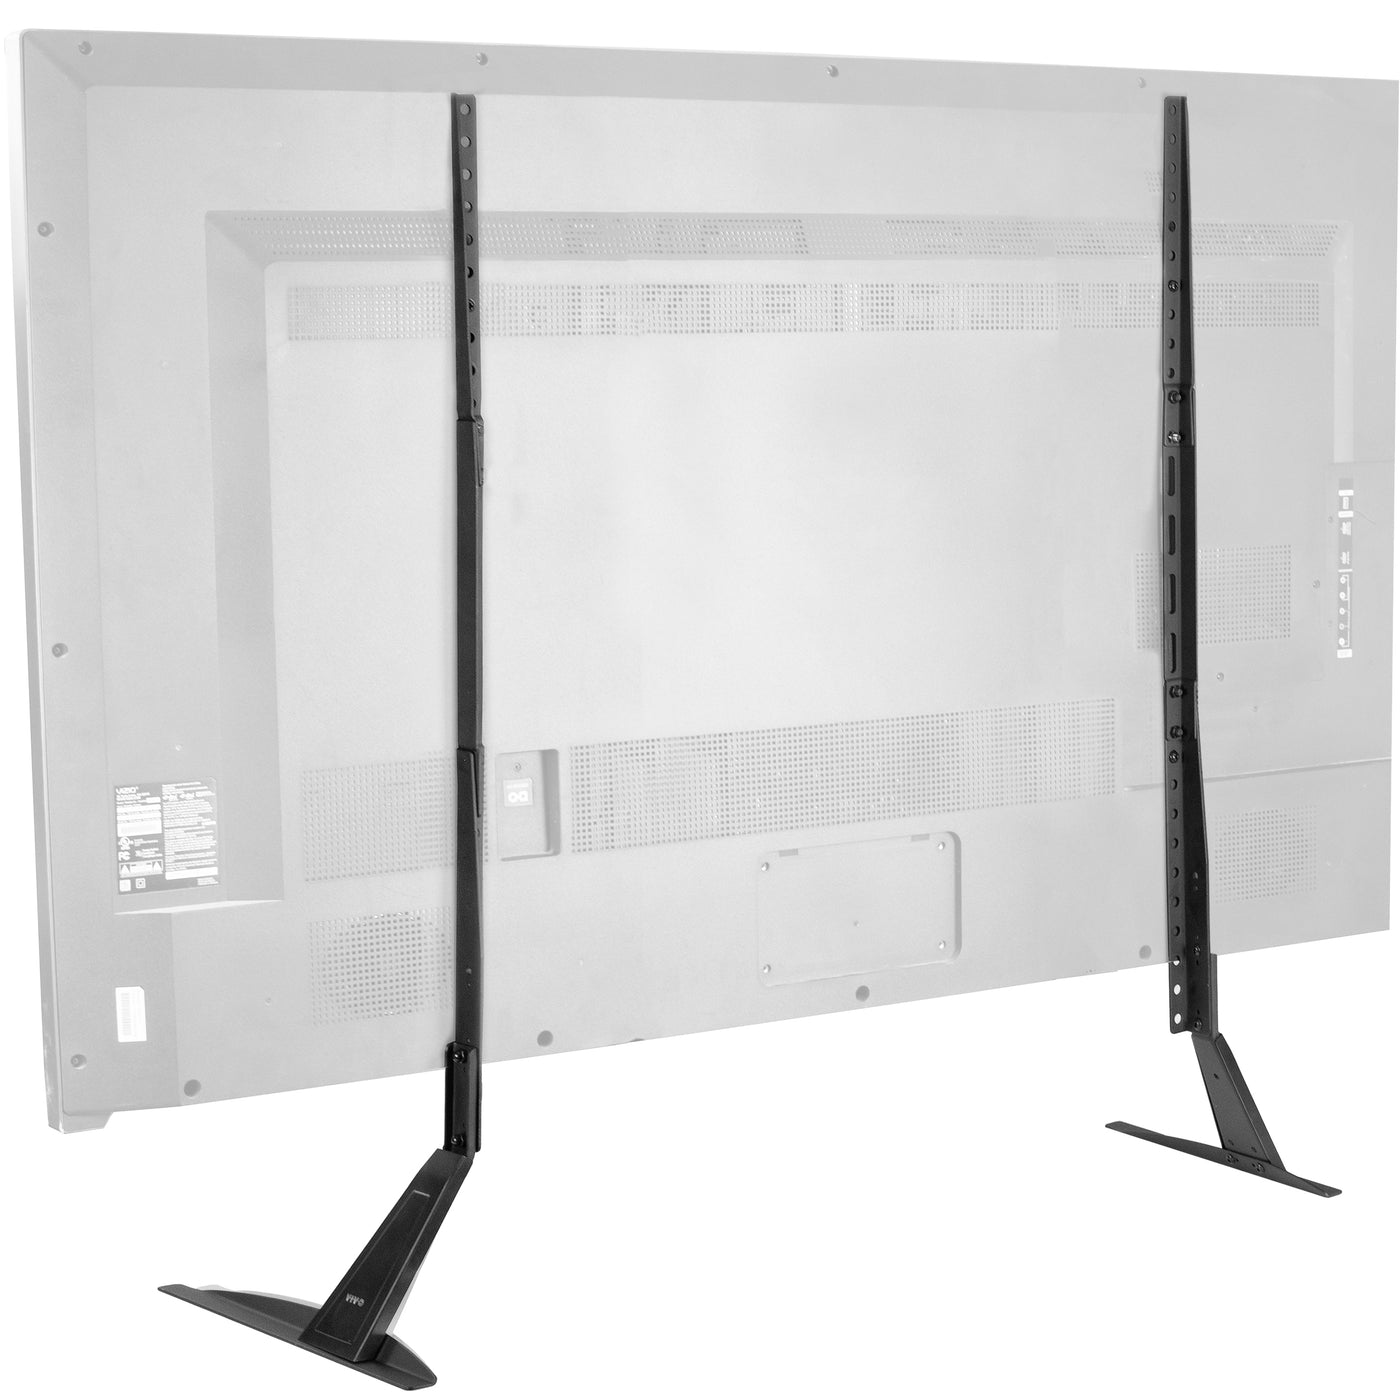 A TV stand with three height settings. 